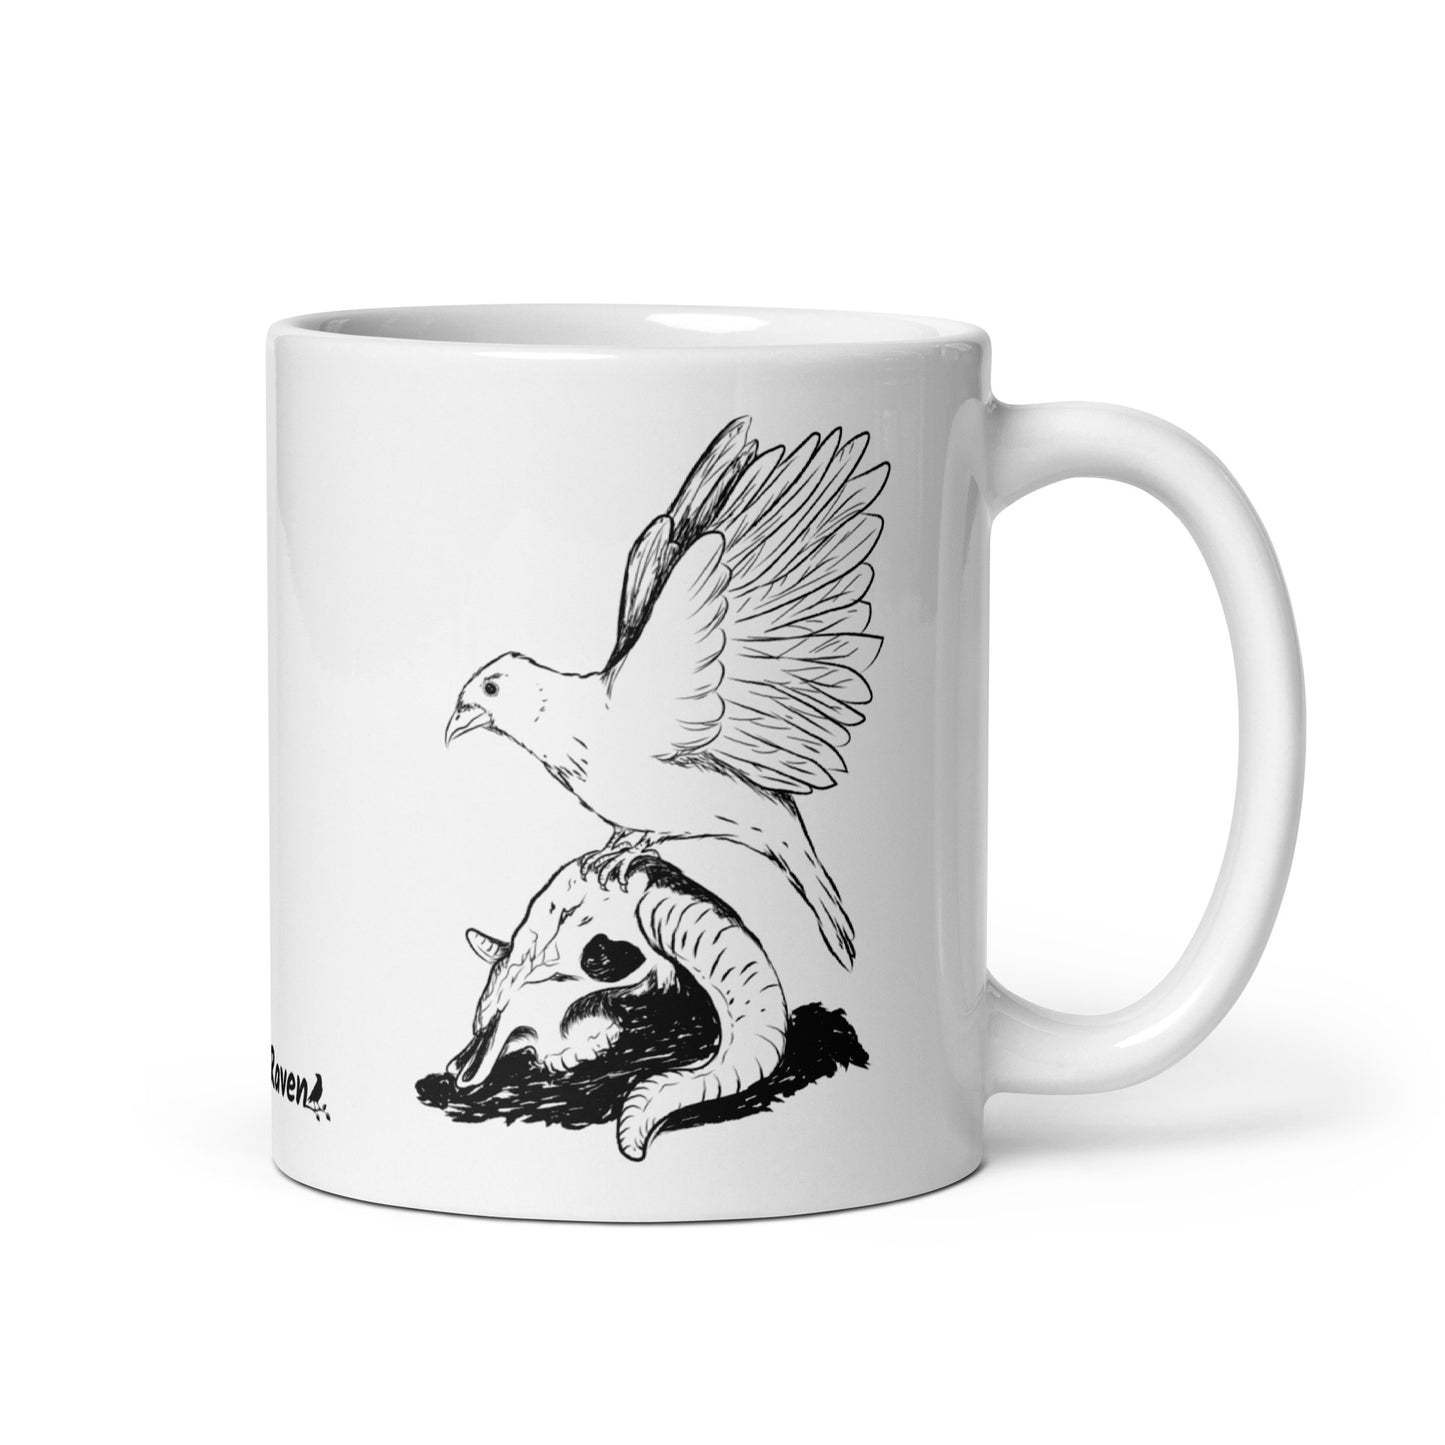 11 ounce white glossy mug featuring double sided print of Reflections, a design with a crow with wings outstretched on a sheep skull.